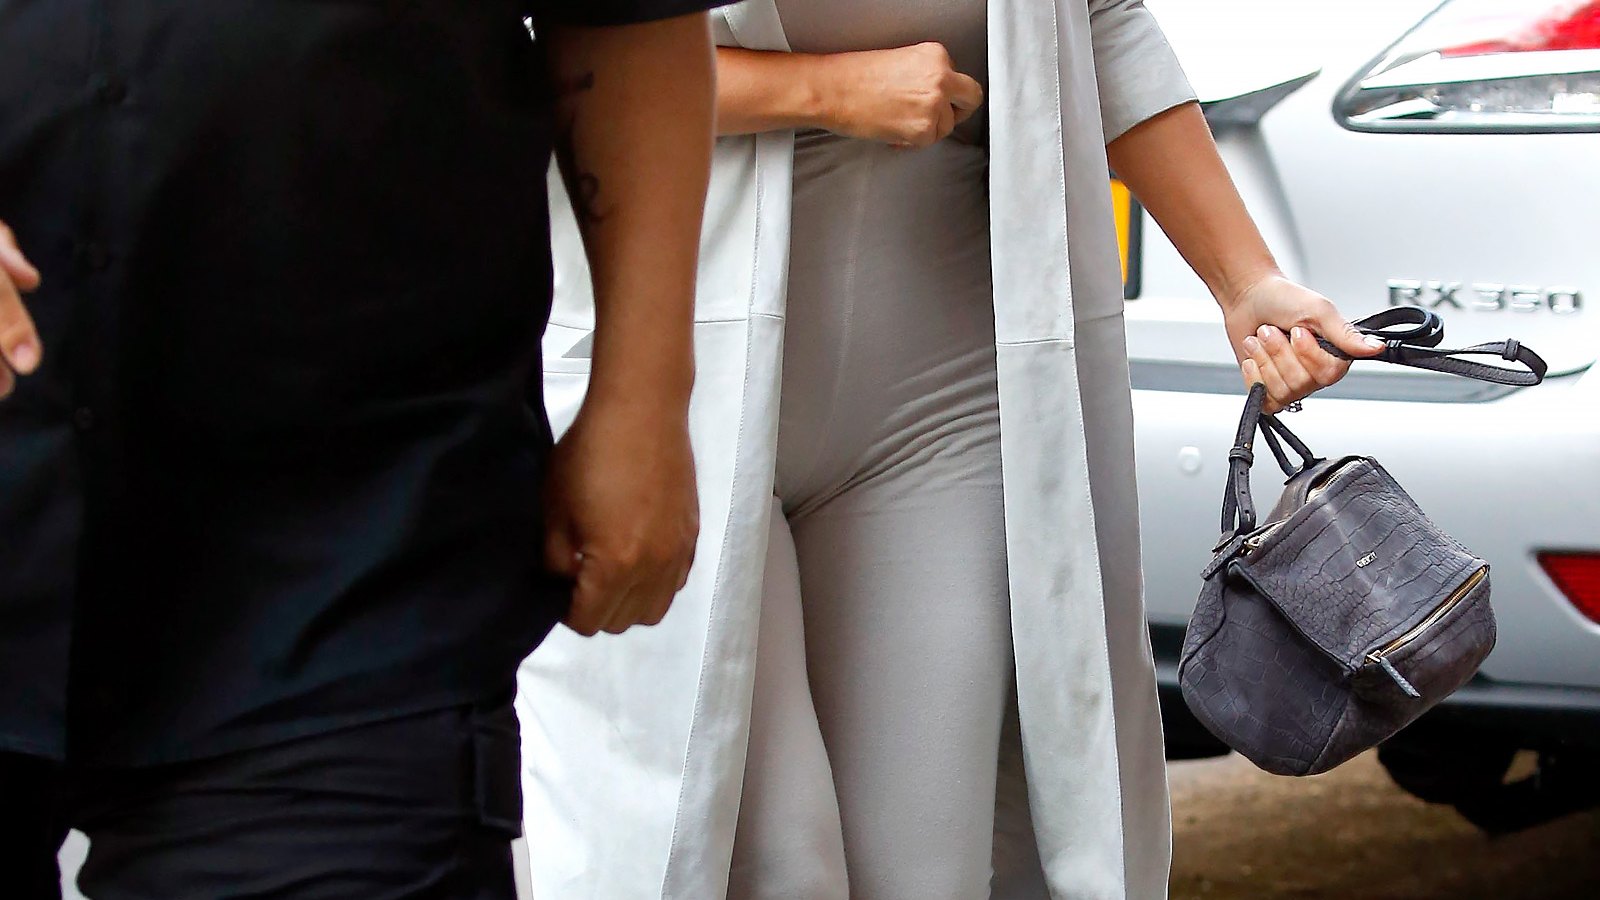 Kim Kardashian arrives at her apartment in NYC on May 30, 2015.